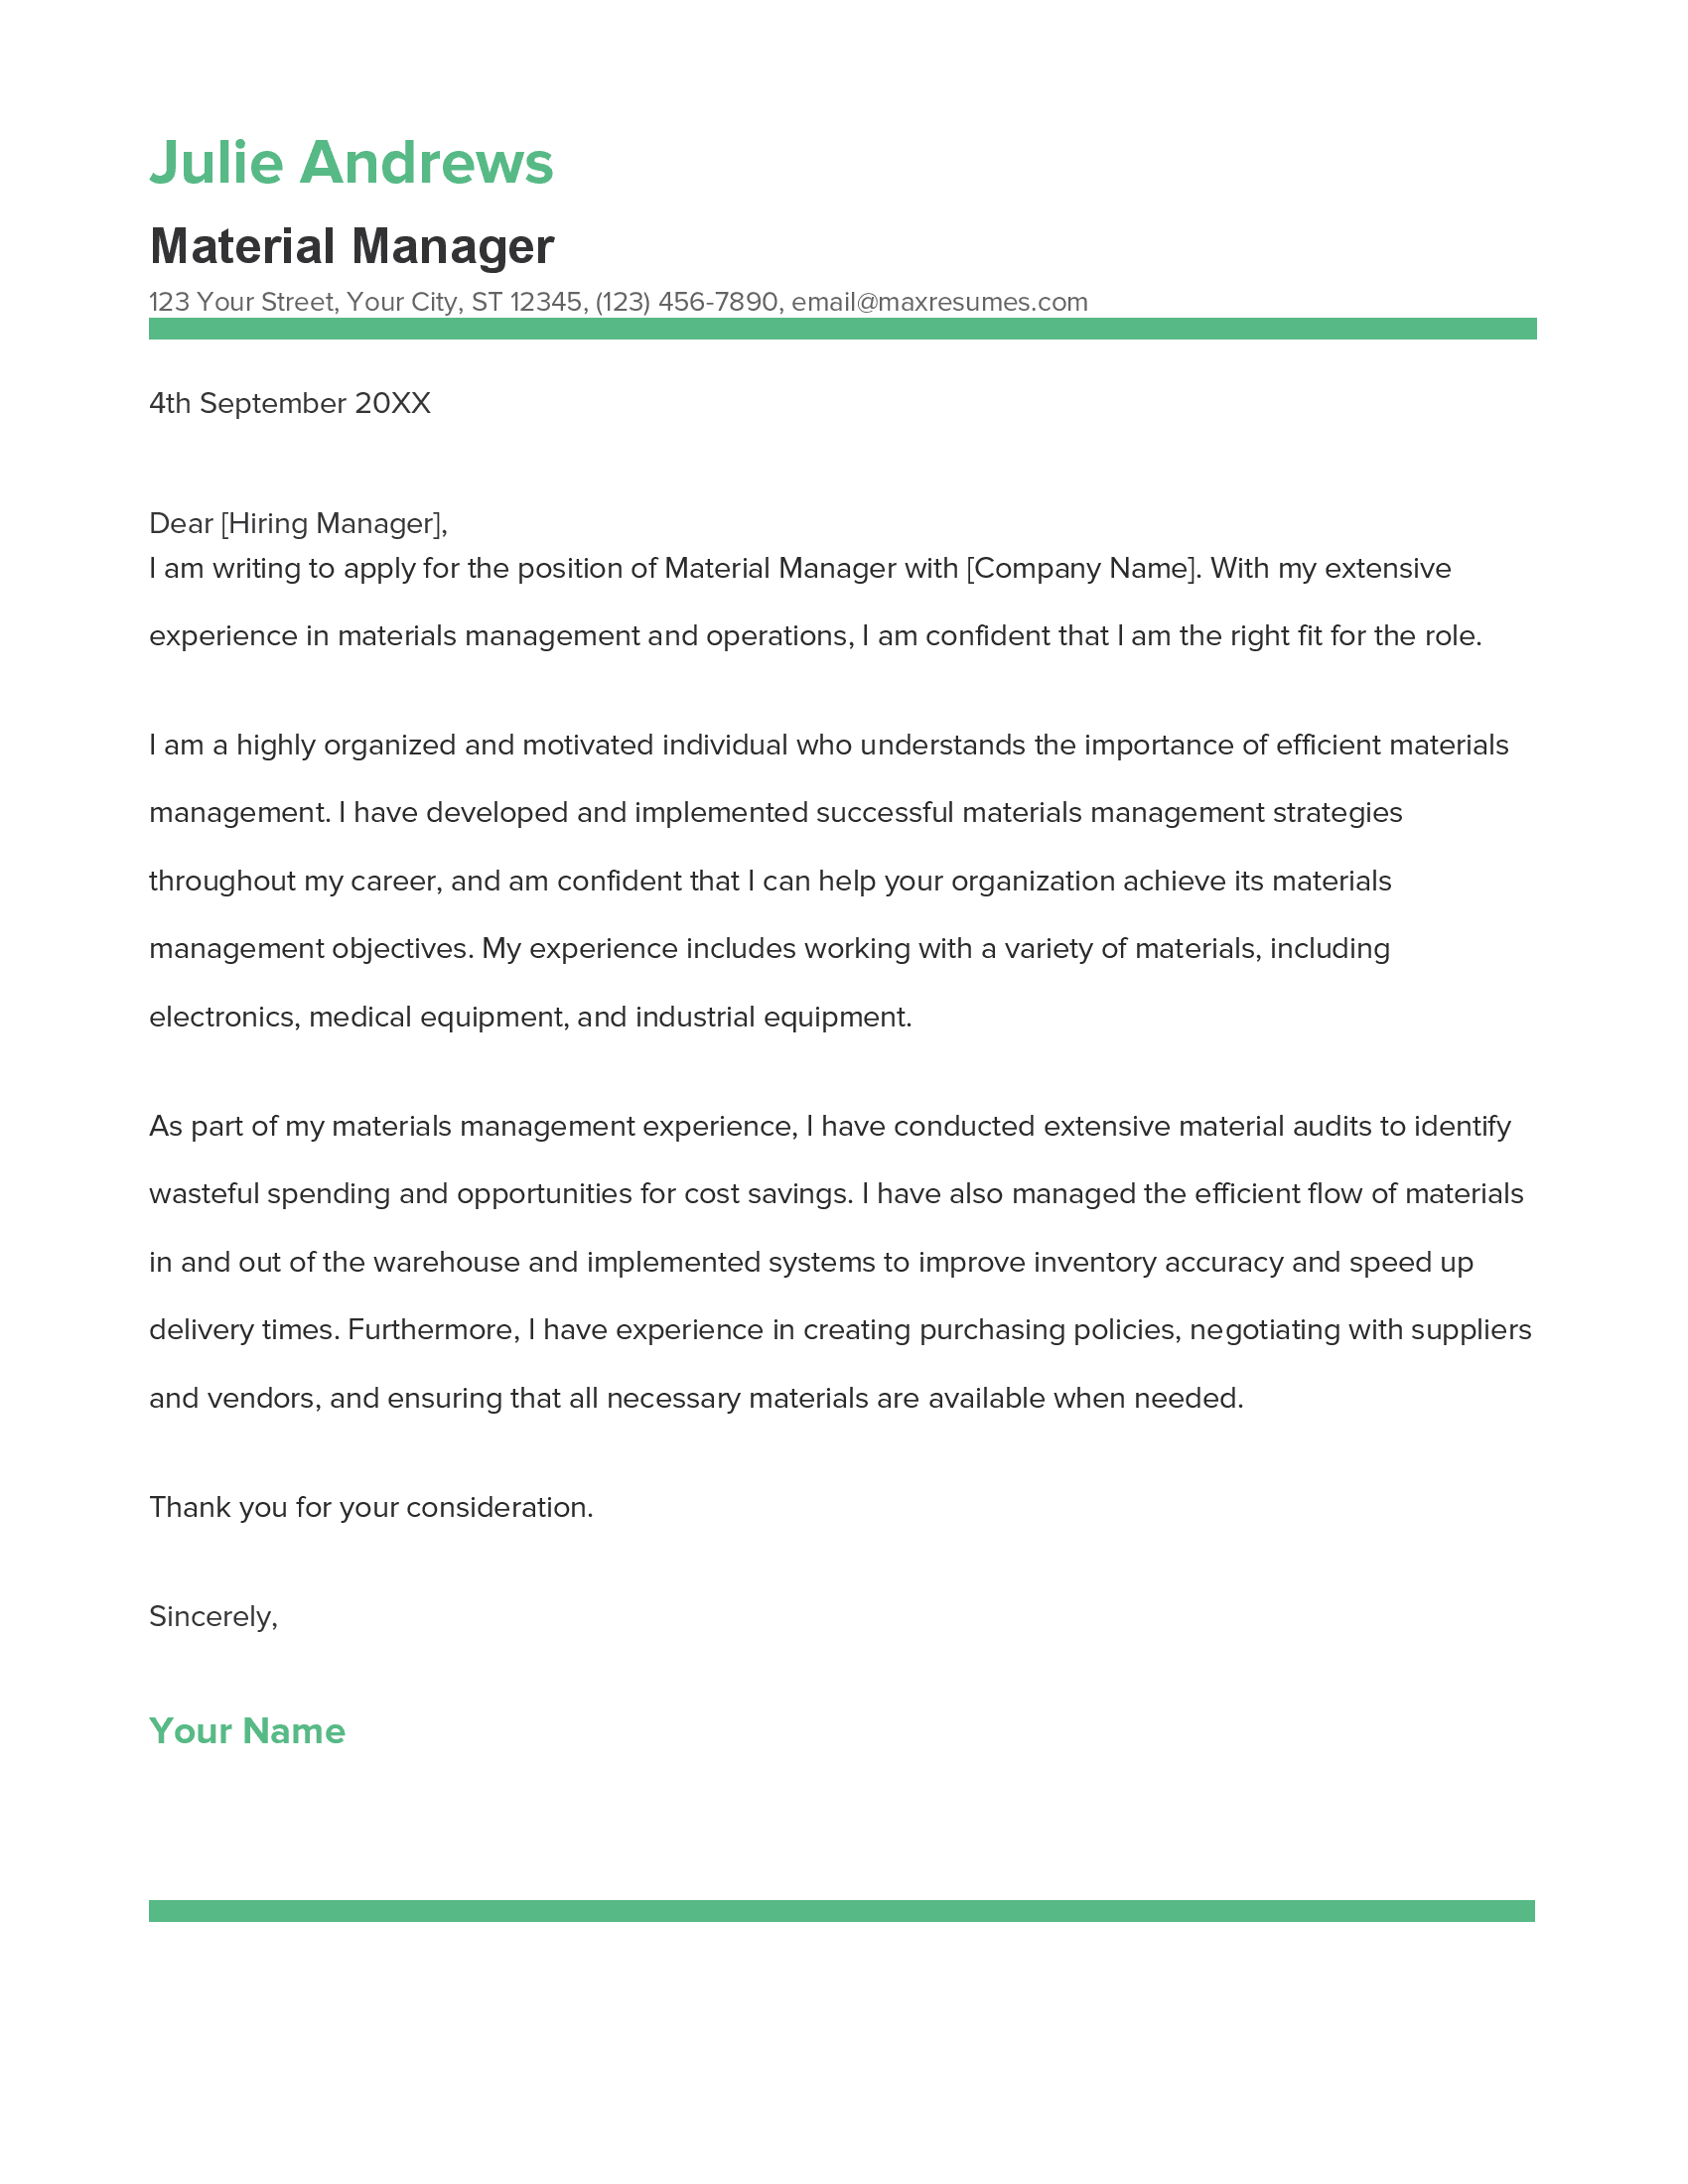 Material Manager Cover Letter Example